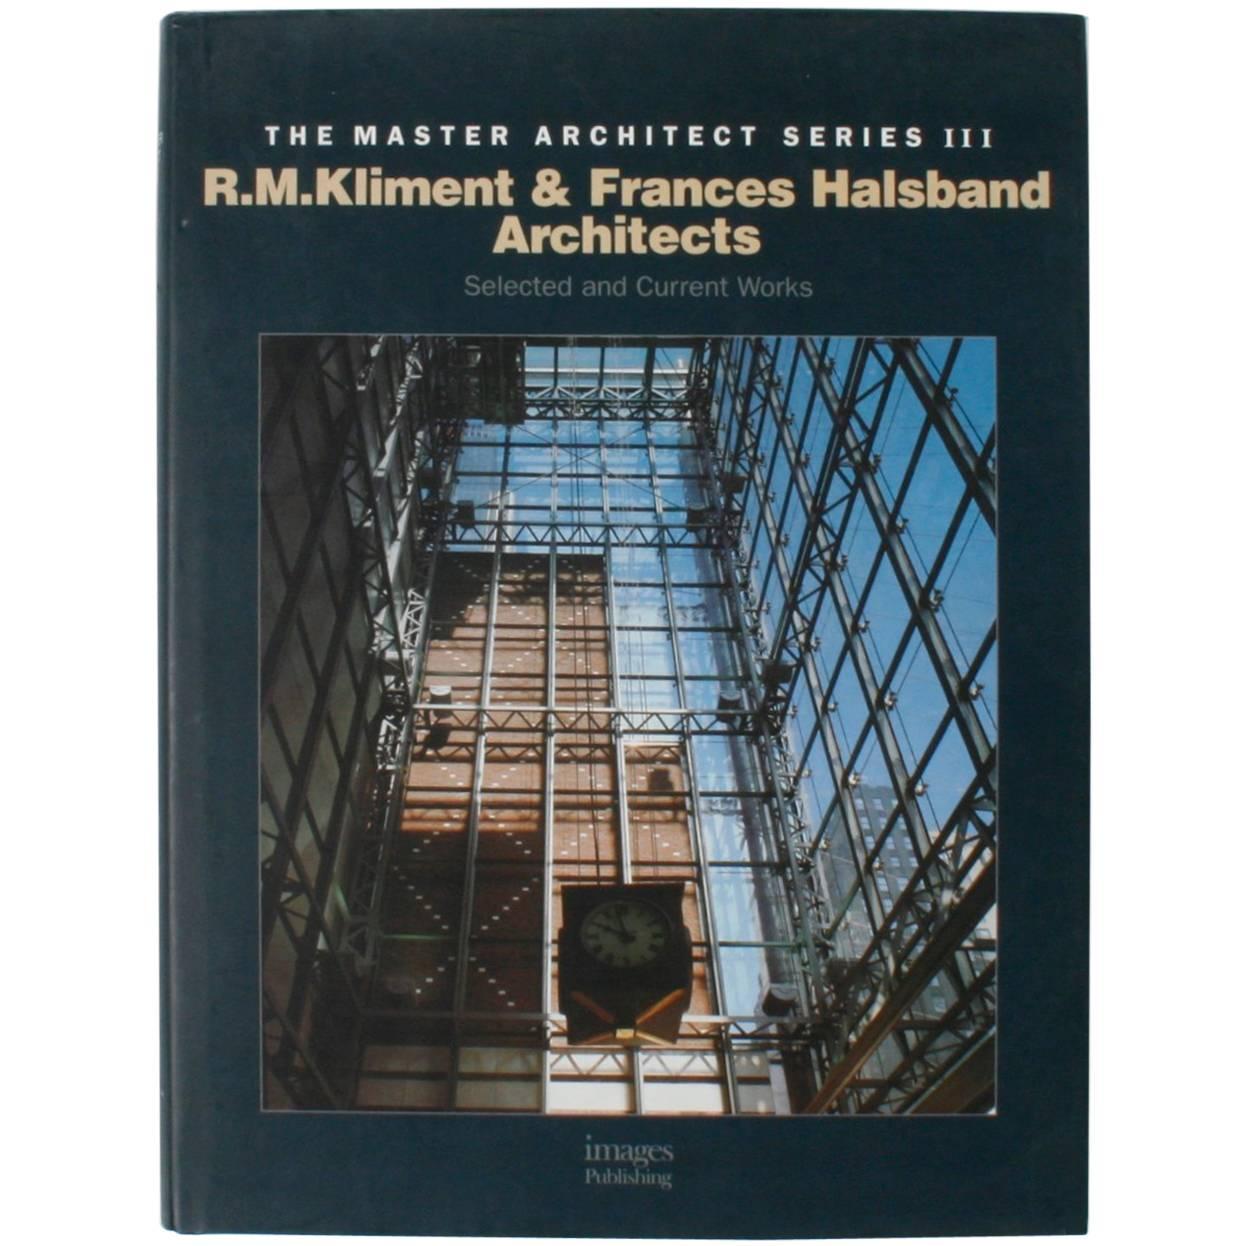 The Master Architect Series III, R.M. Kliment & Frances Halsband Architects For Sale